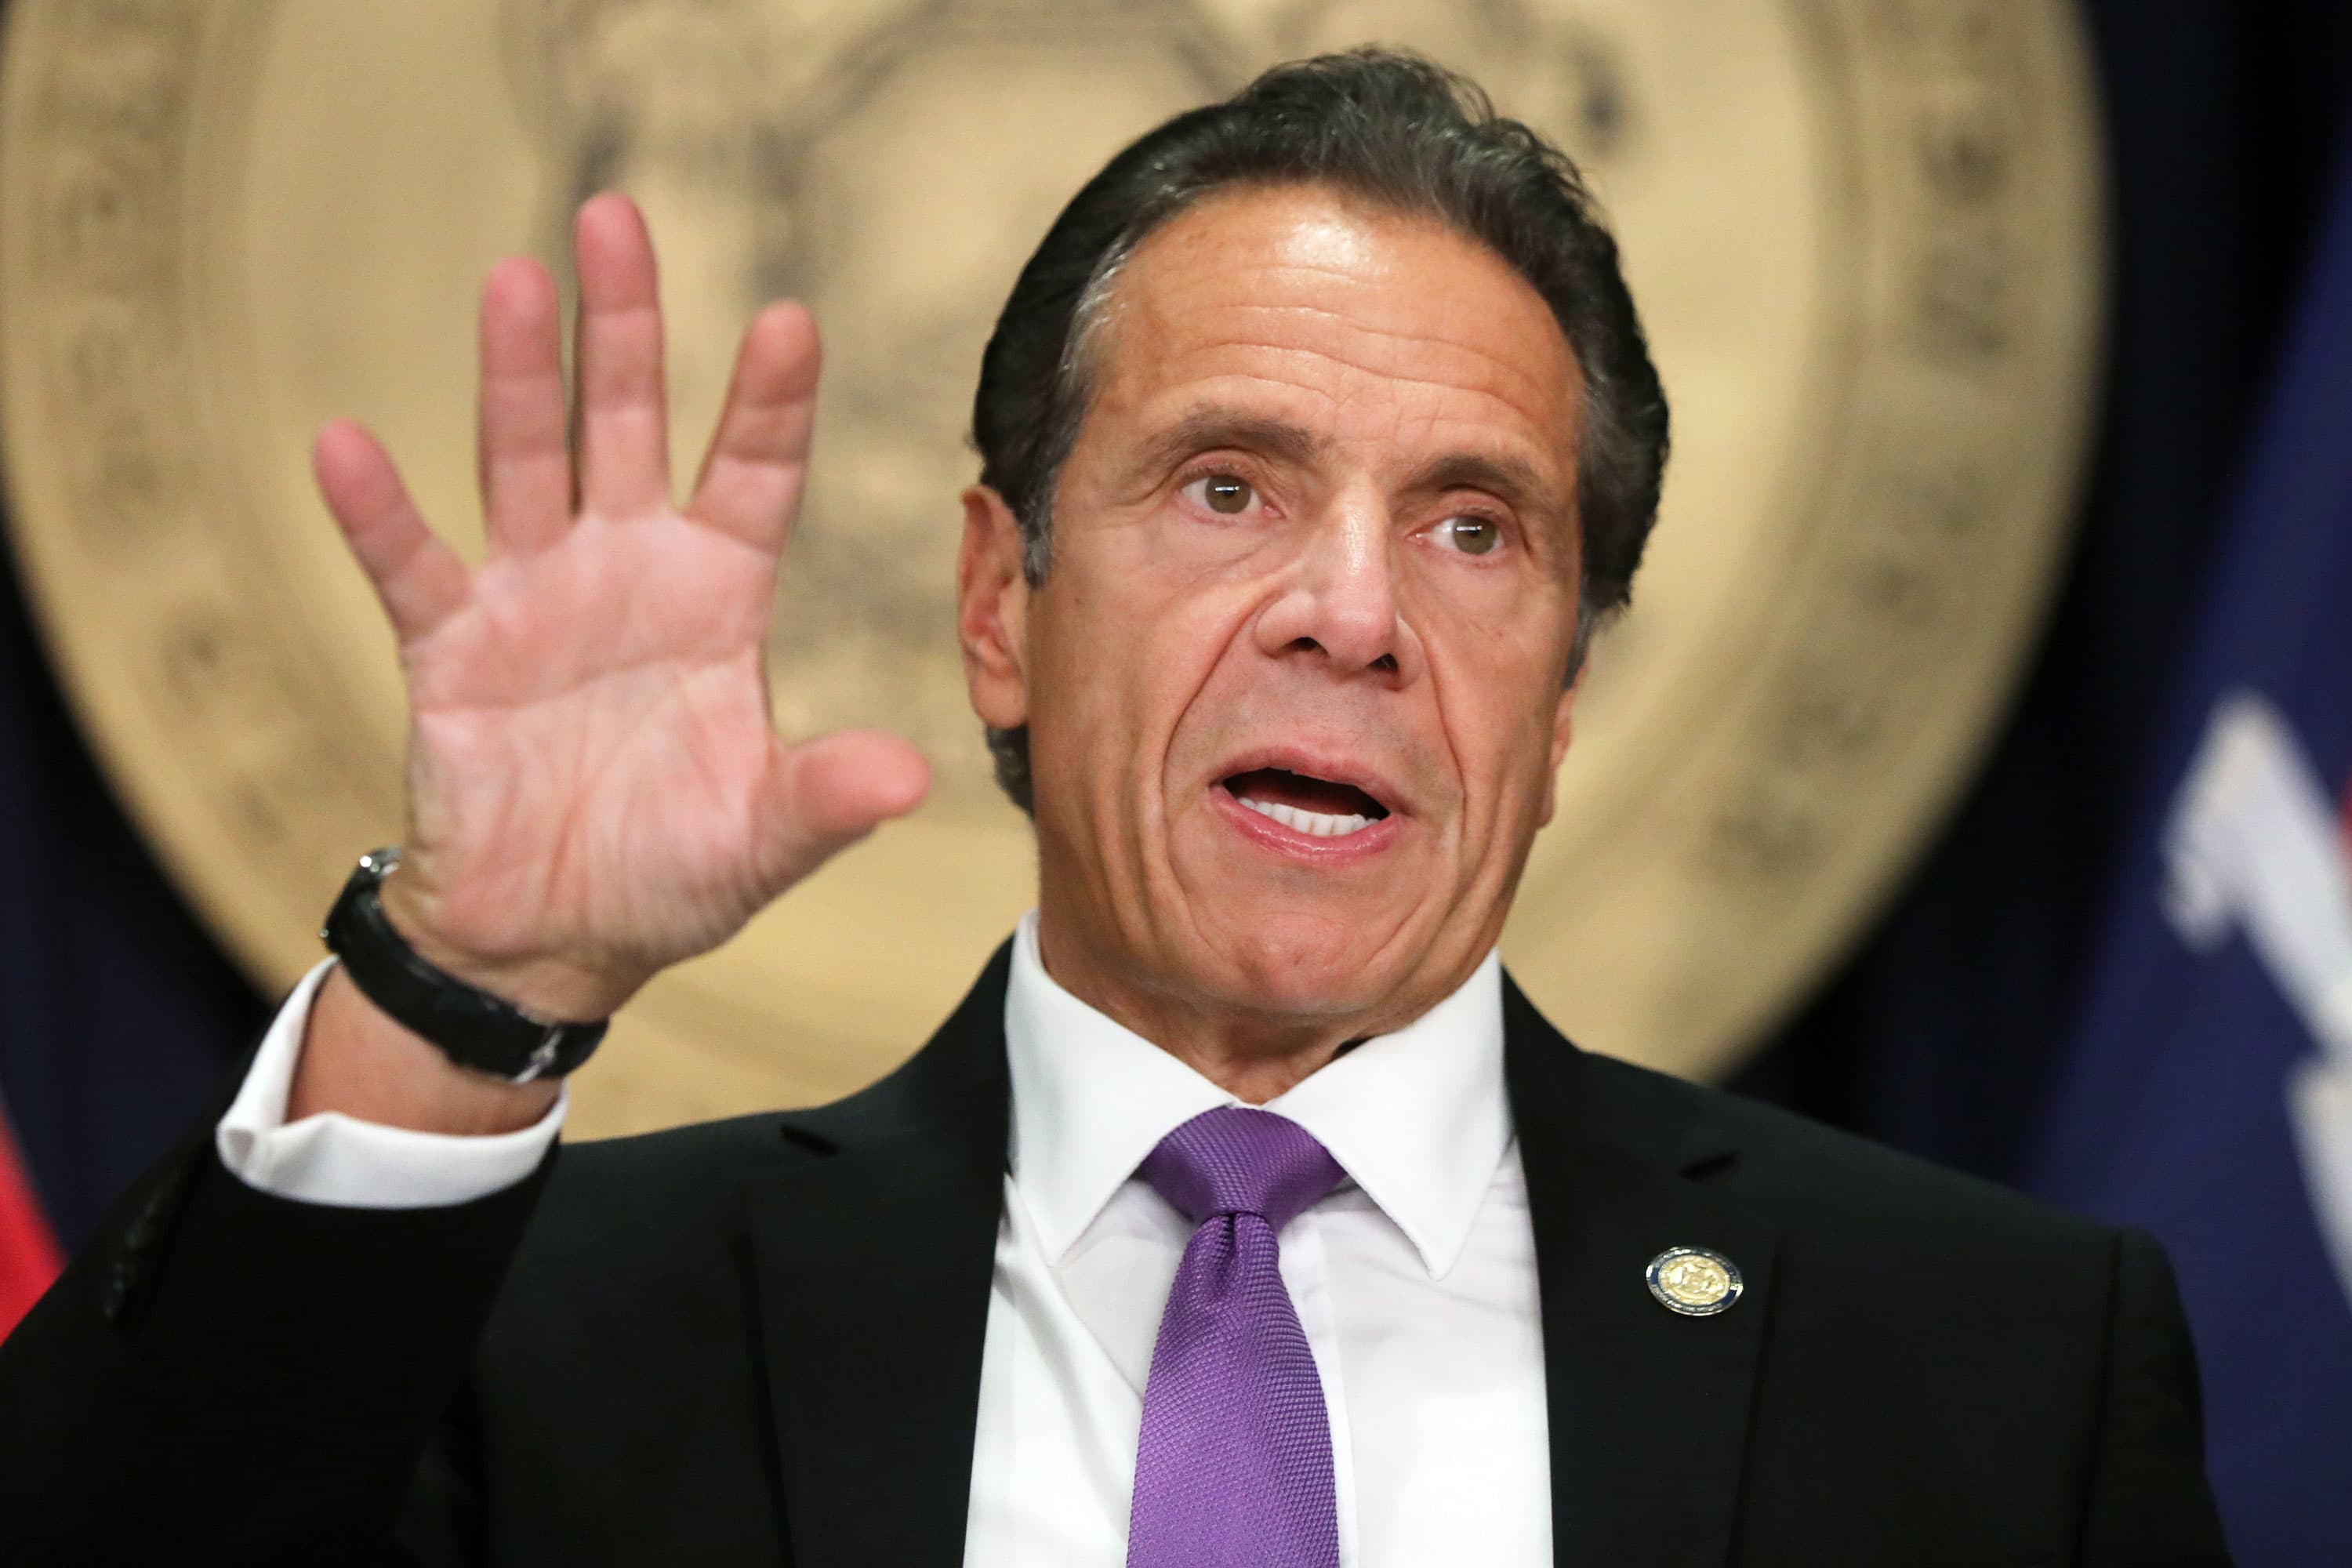 250 CEOs and CEOs voice ‘alarm’ over largest tax increase in New York history